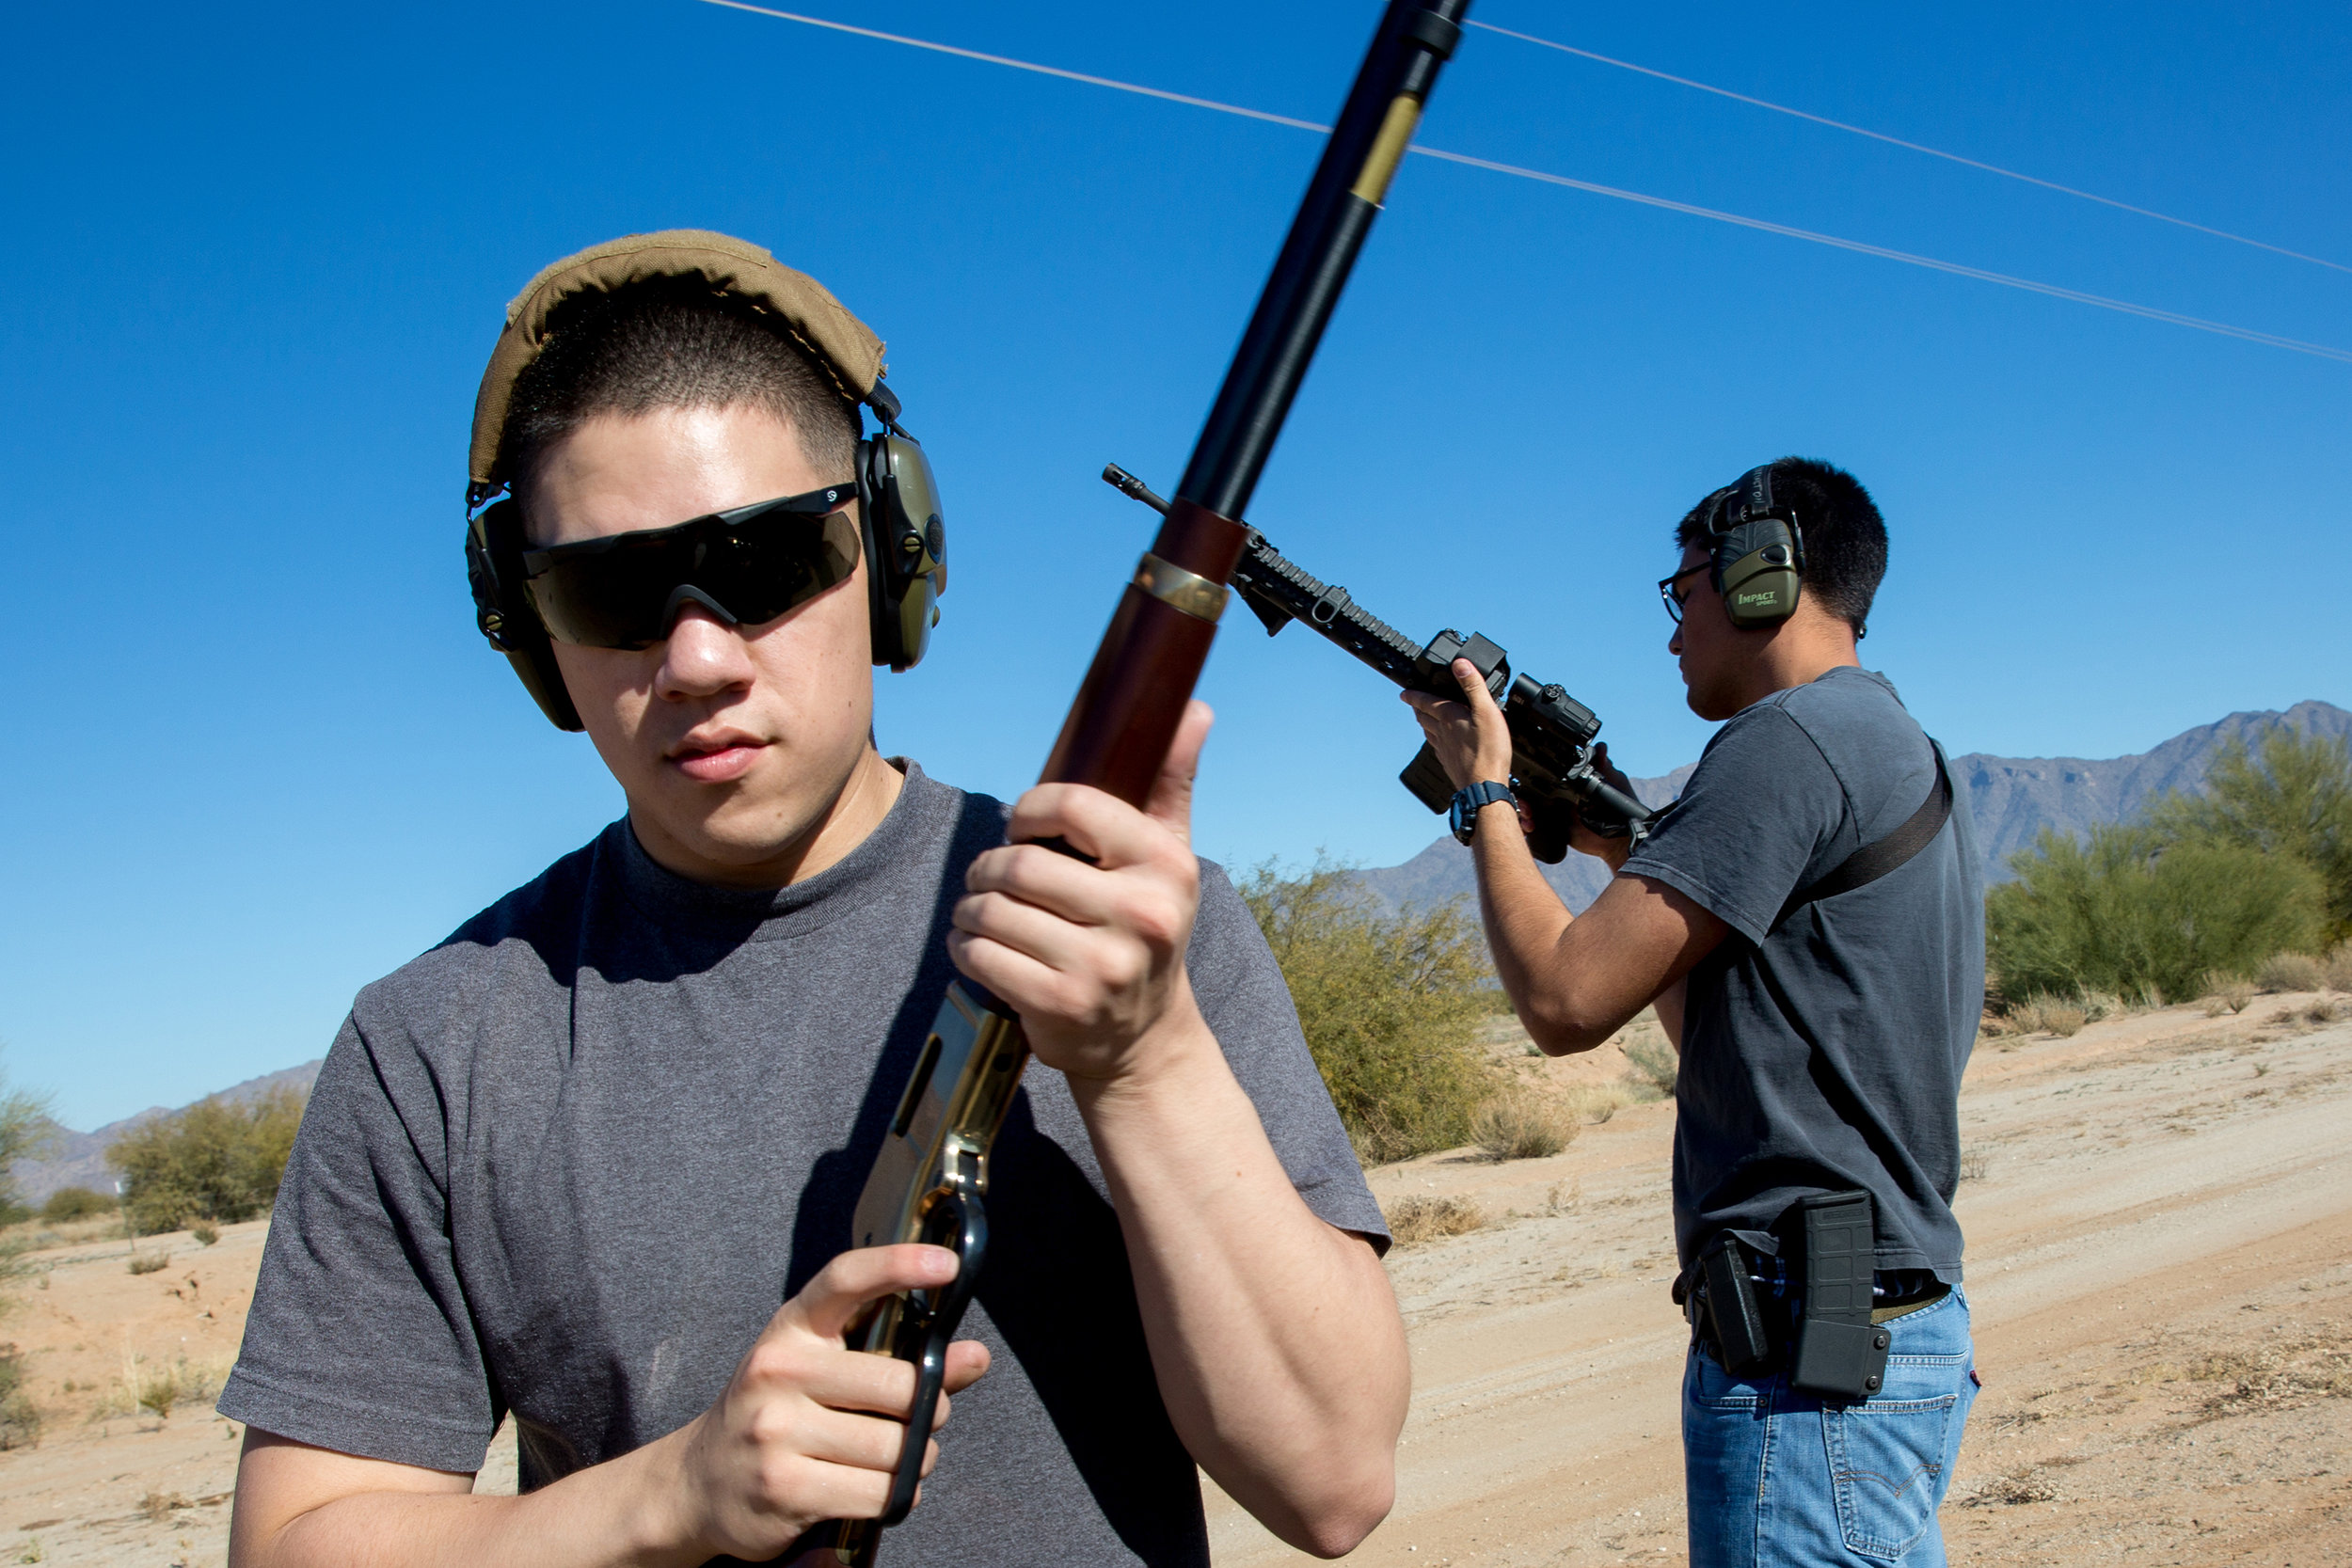  Lance Cpl. Ben Fouse (left) and Petty Officer 3rd Class Thomas Warrington (right) prepare their guns to shoot at targets in the Goodyear desert on Dec. 18, 2015. The two were trained in gun safety and take every precaution to ensure their proper use